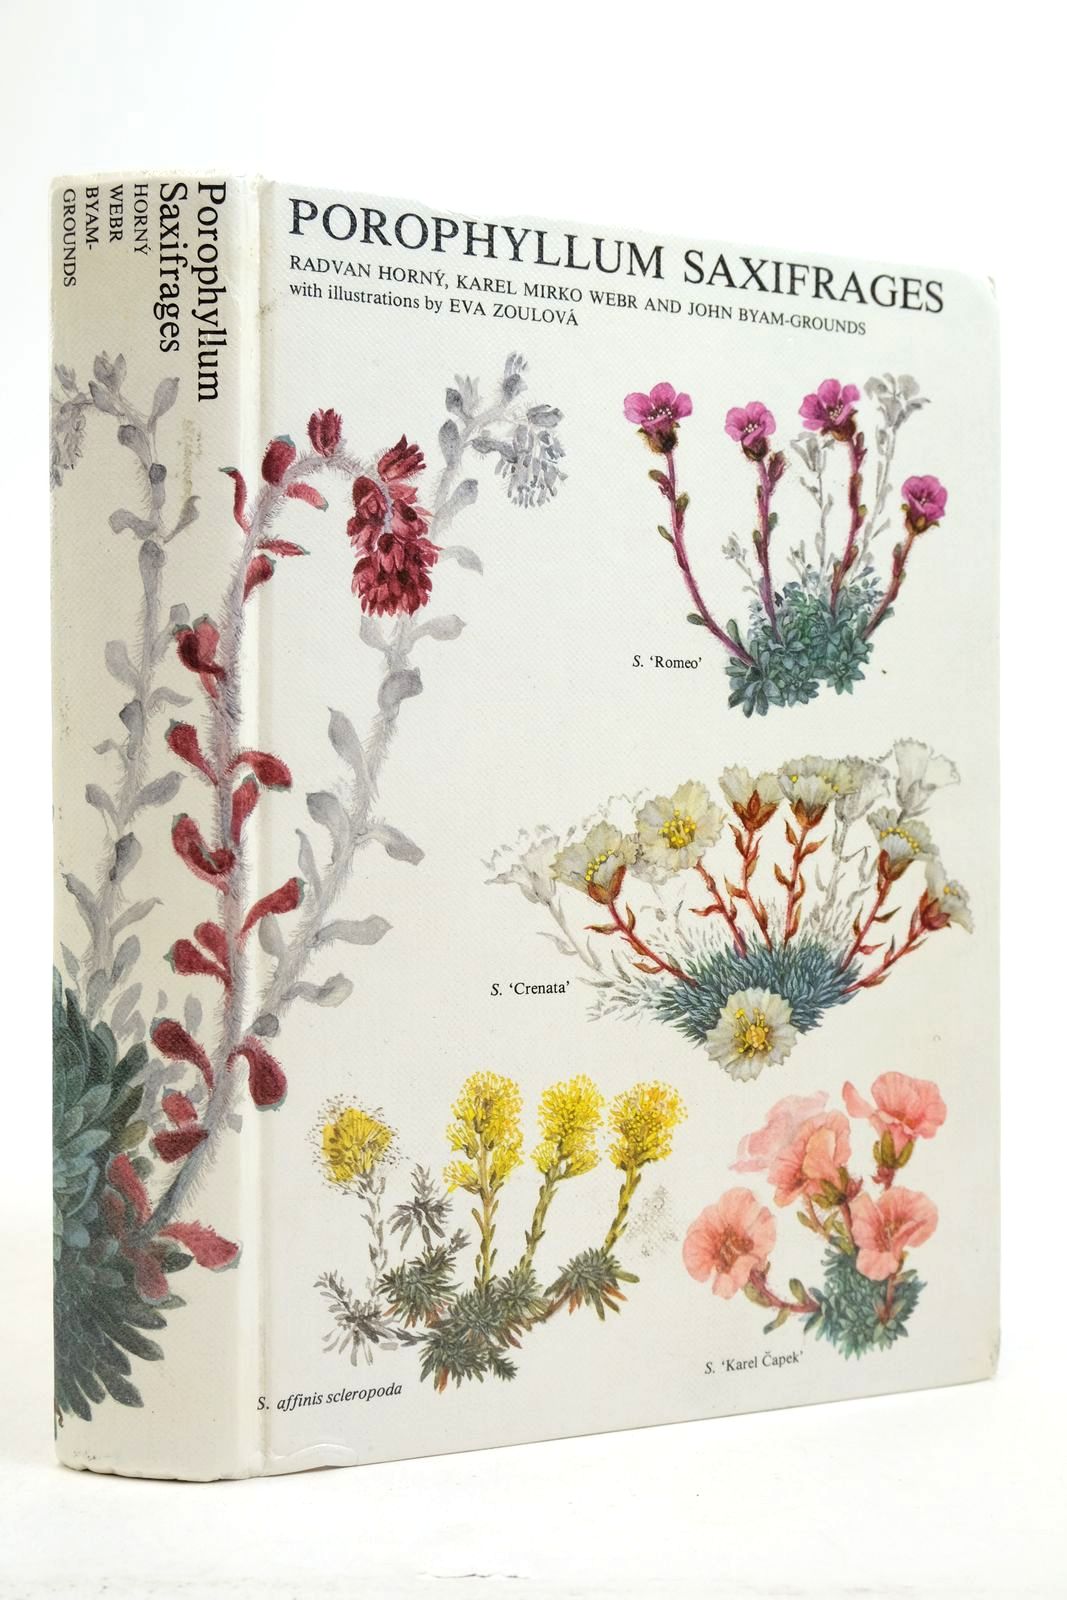 Photo of POROPHYLLUM SAXIFRAGES written by Horny, Radvan Webr, Karel Mirko Byam-Grounds, John (STOCK CODE: 2140246)  for sale by Stella & Rose's Books